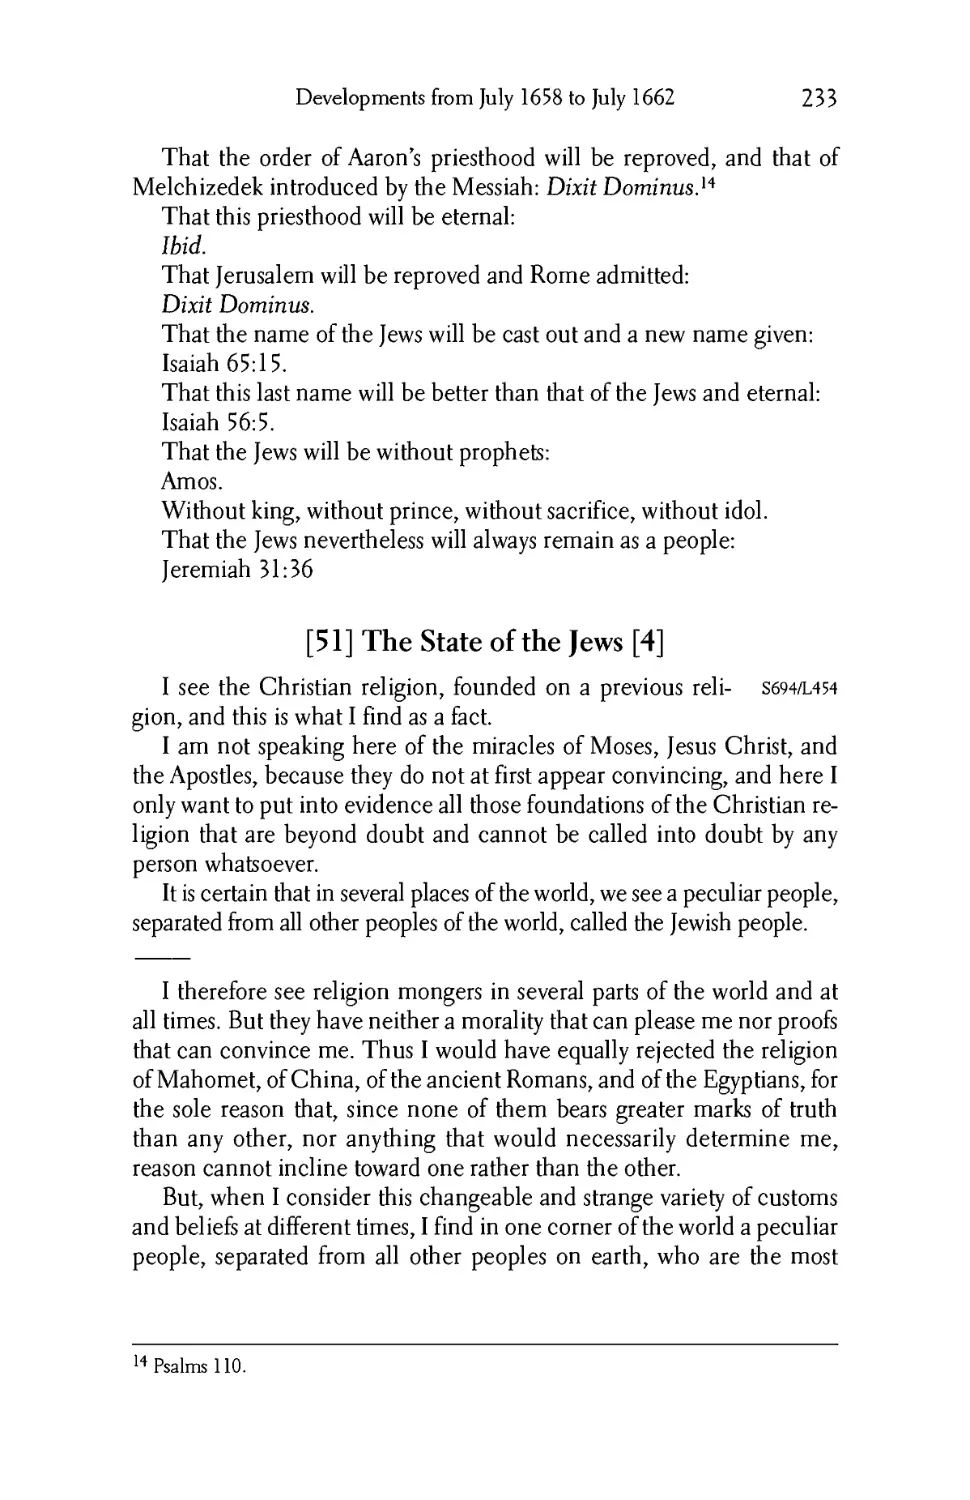 51. The State of the Jews 4